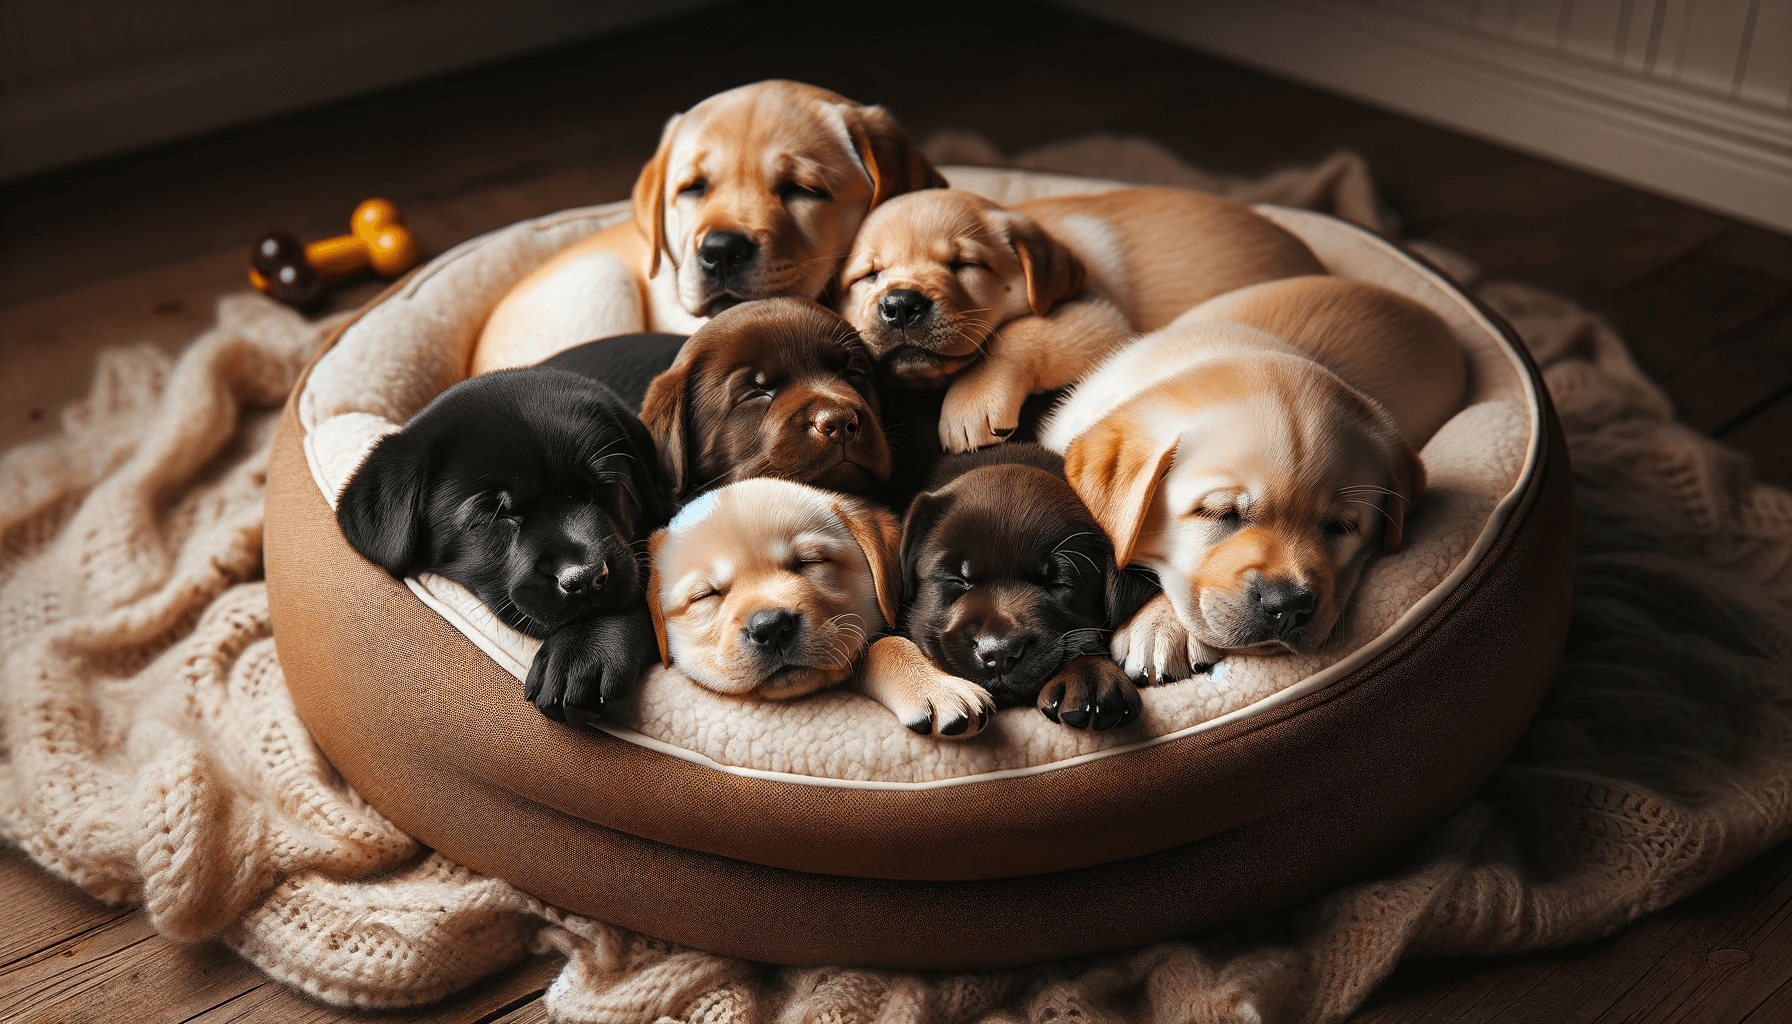 Adorable Labrador Retriever puppies cuddling together in a cozy dog bed, showcasing their irresistible charm.